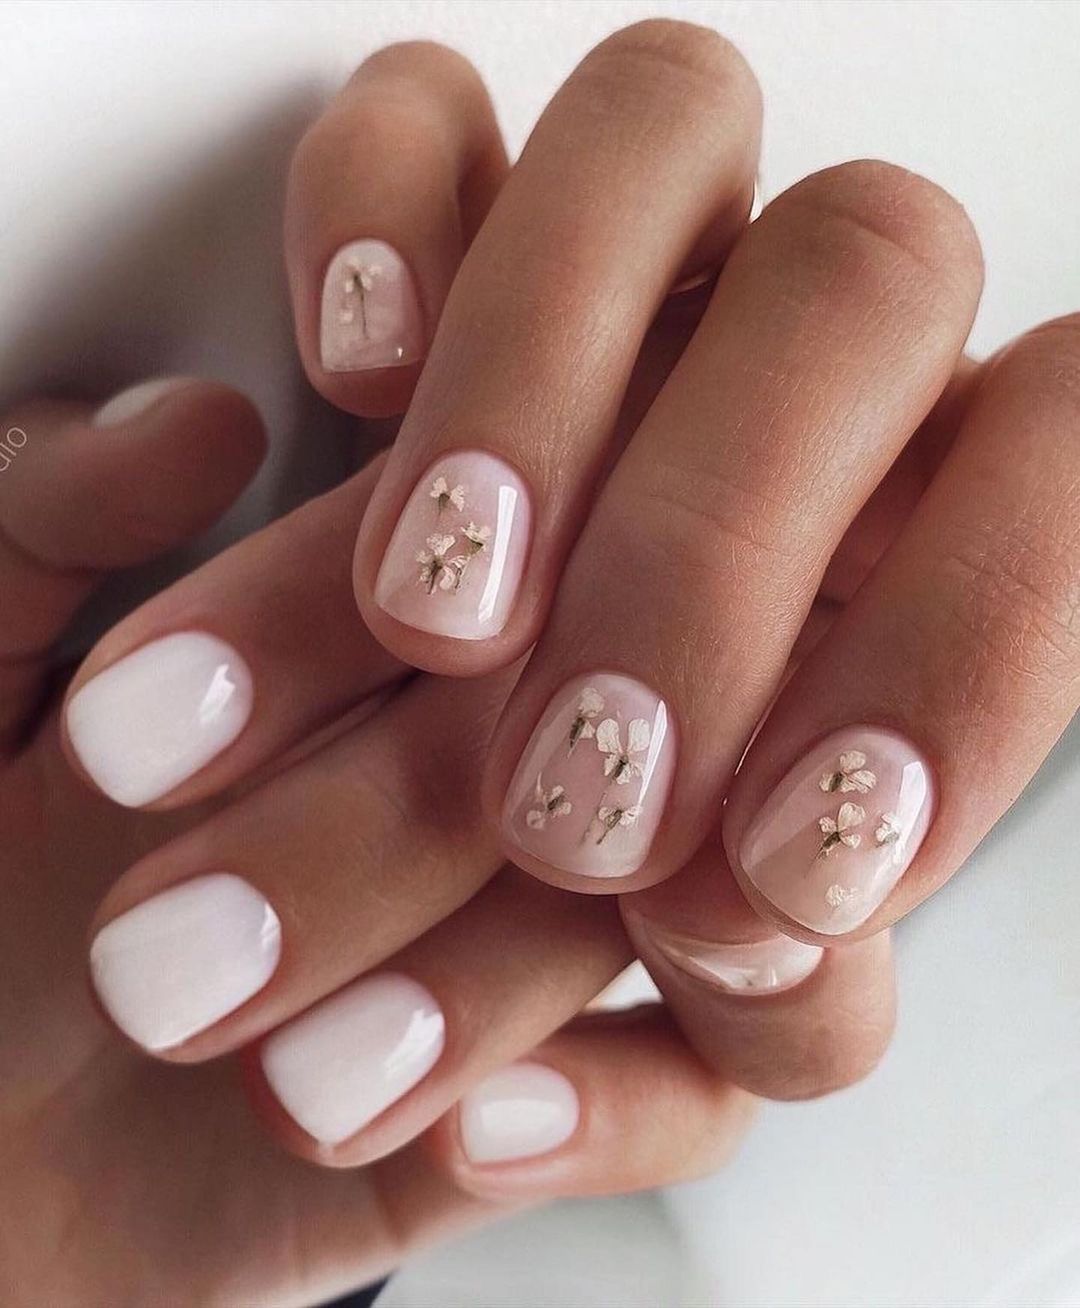 30 Gorgeous Square Nail Designs For 2021 images 1